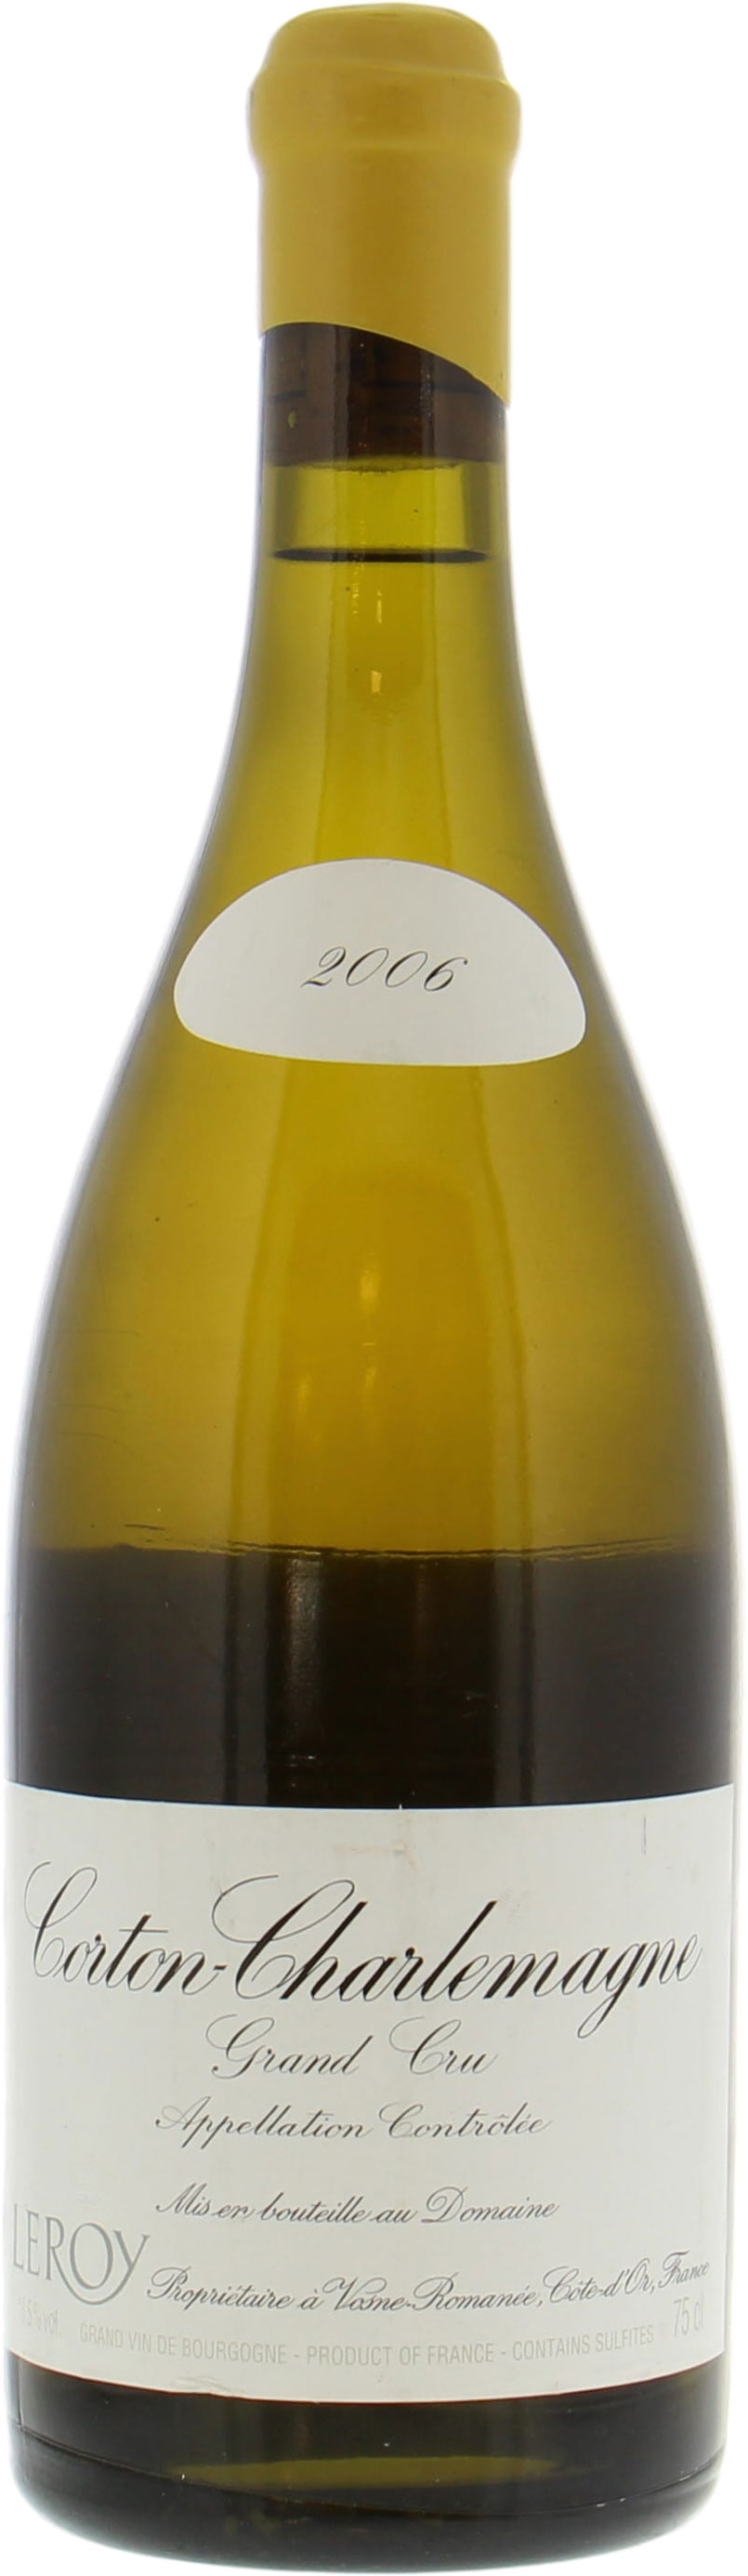 Domaine Leroy - Corton Charlemagne 2006 Perfect